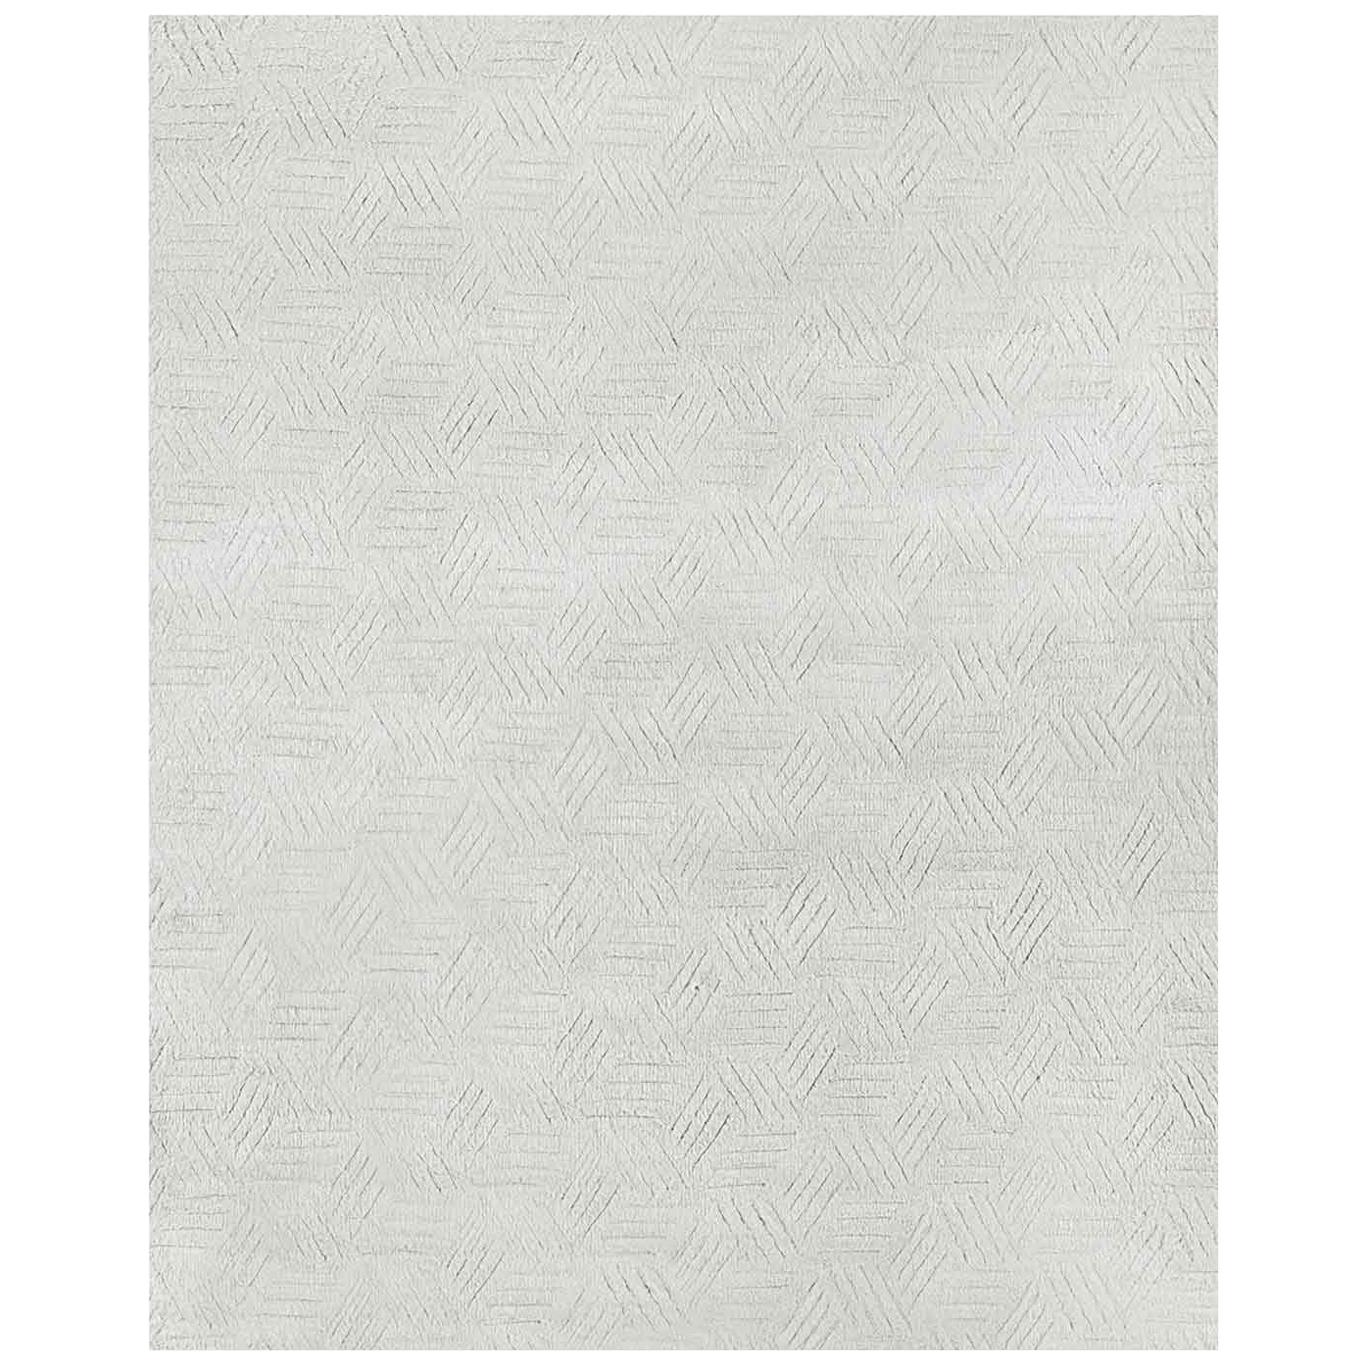 For Sale: Silver (Silver/Charcoal) Ben Soleimani Mirada Rug– Moroccan Hand-knotted Plush Silver/Charcoal 8'x10'